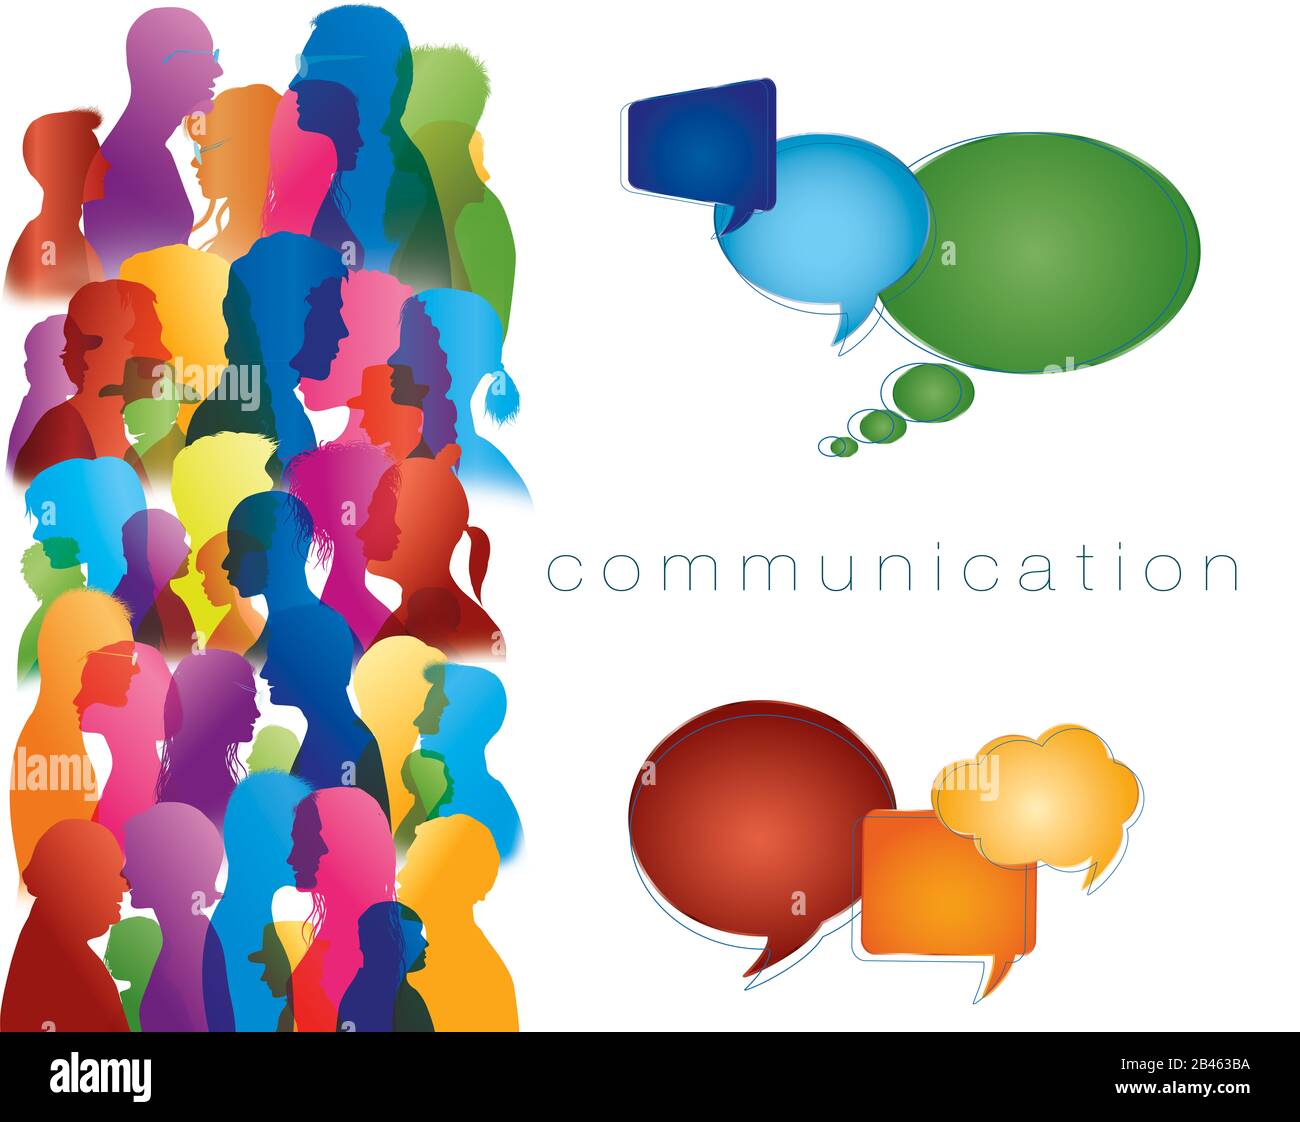 Concept to communicate. Social networking. Diverse people. Large isolated group people in profile talking silhouette. Speech bubble. Crowd speaks. Stock Photo